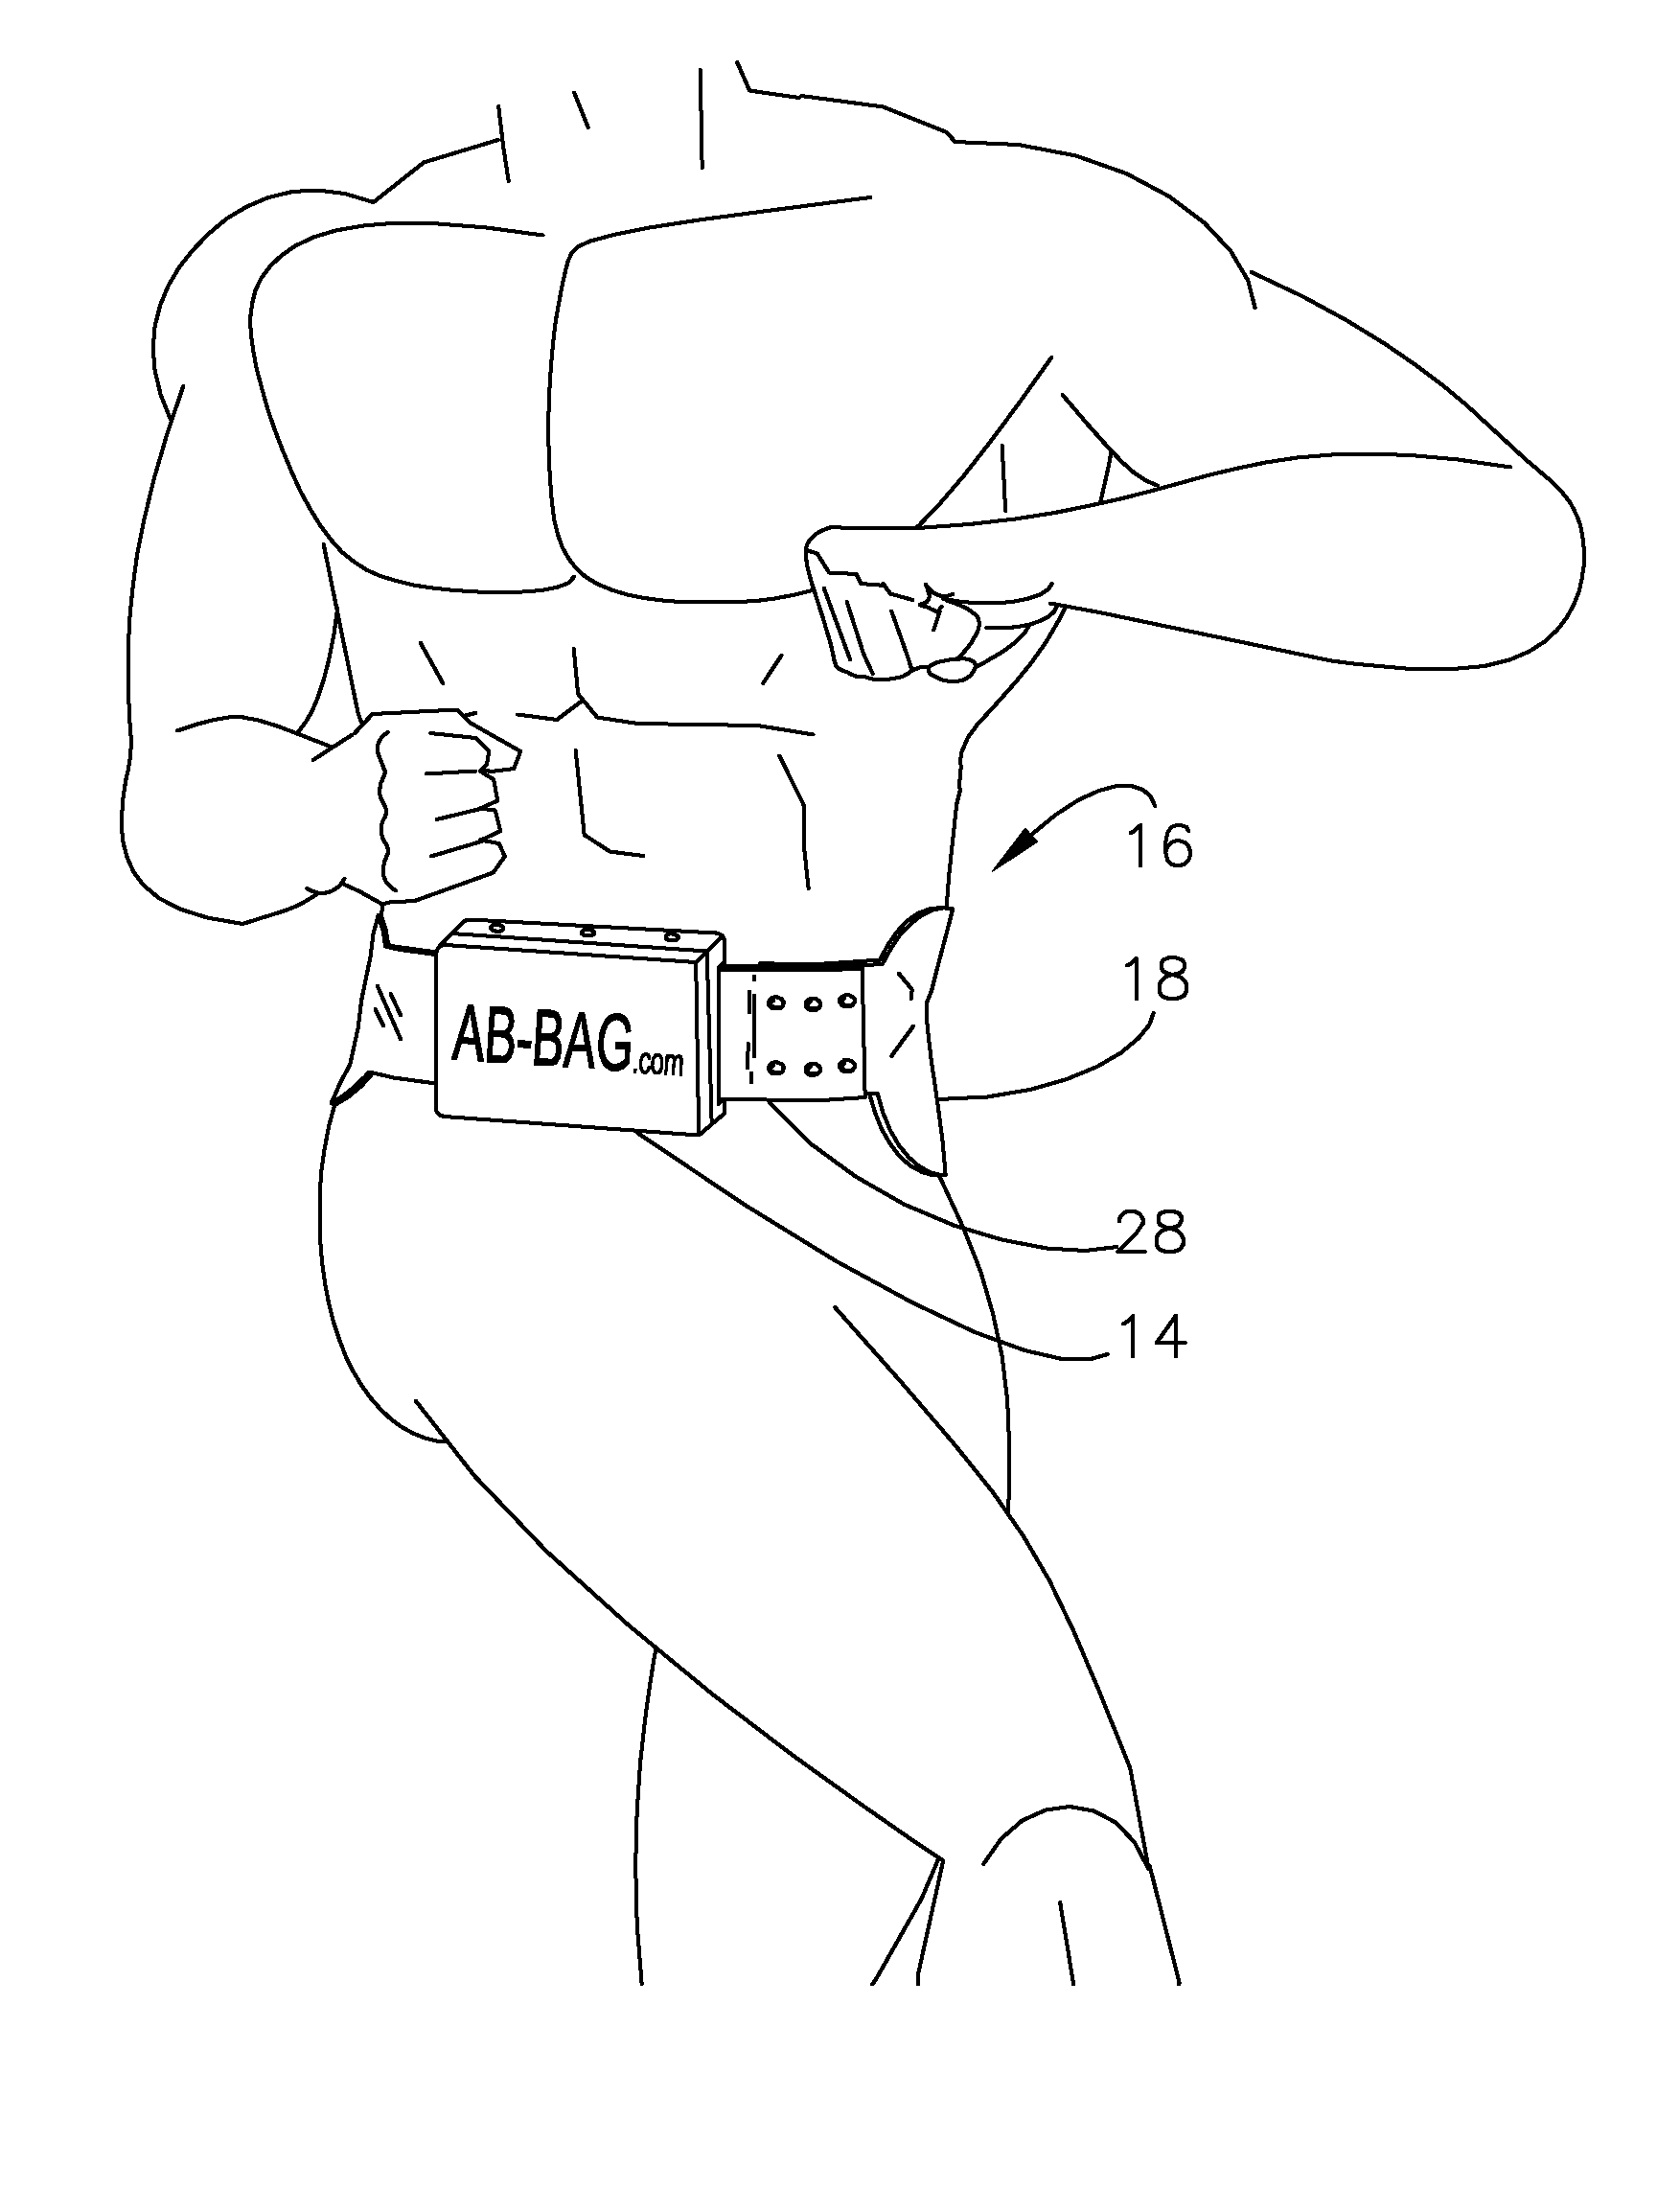 Compressive Device and Carrying Compartment For Use During Exercise